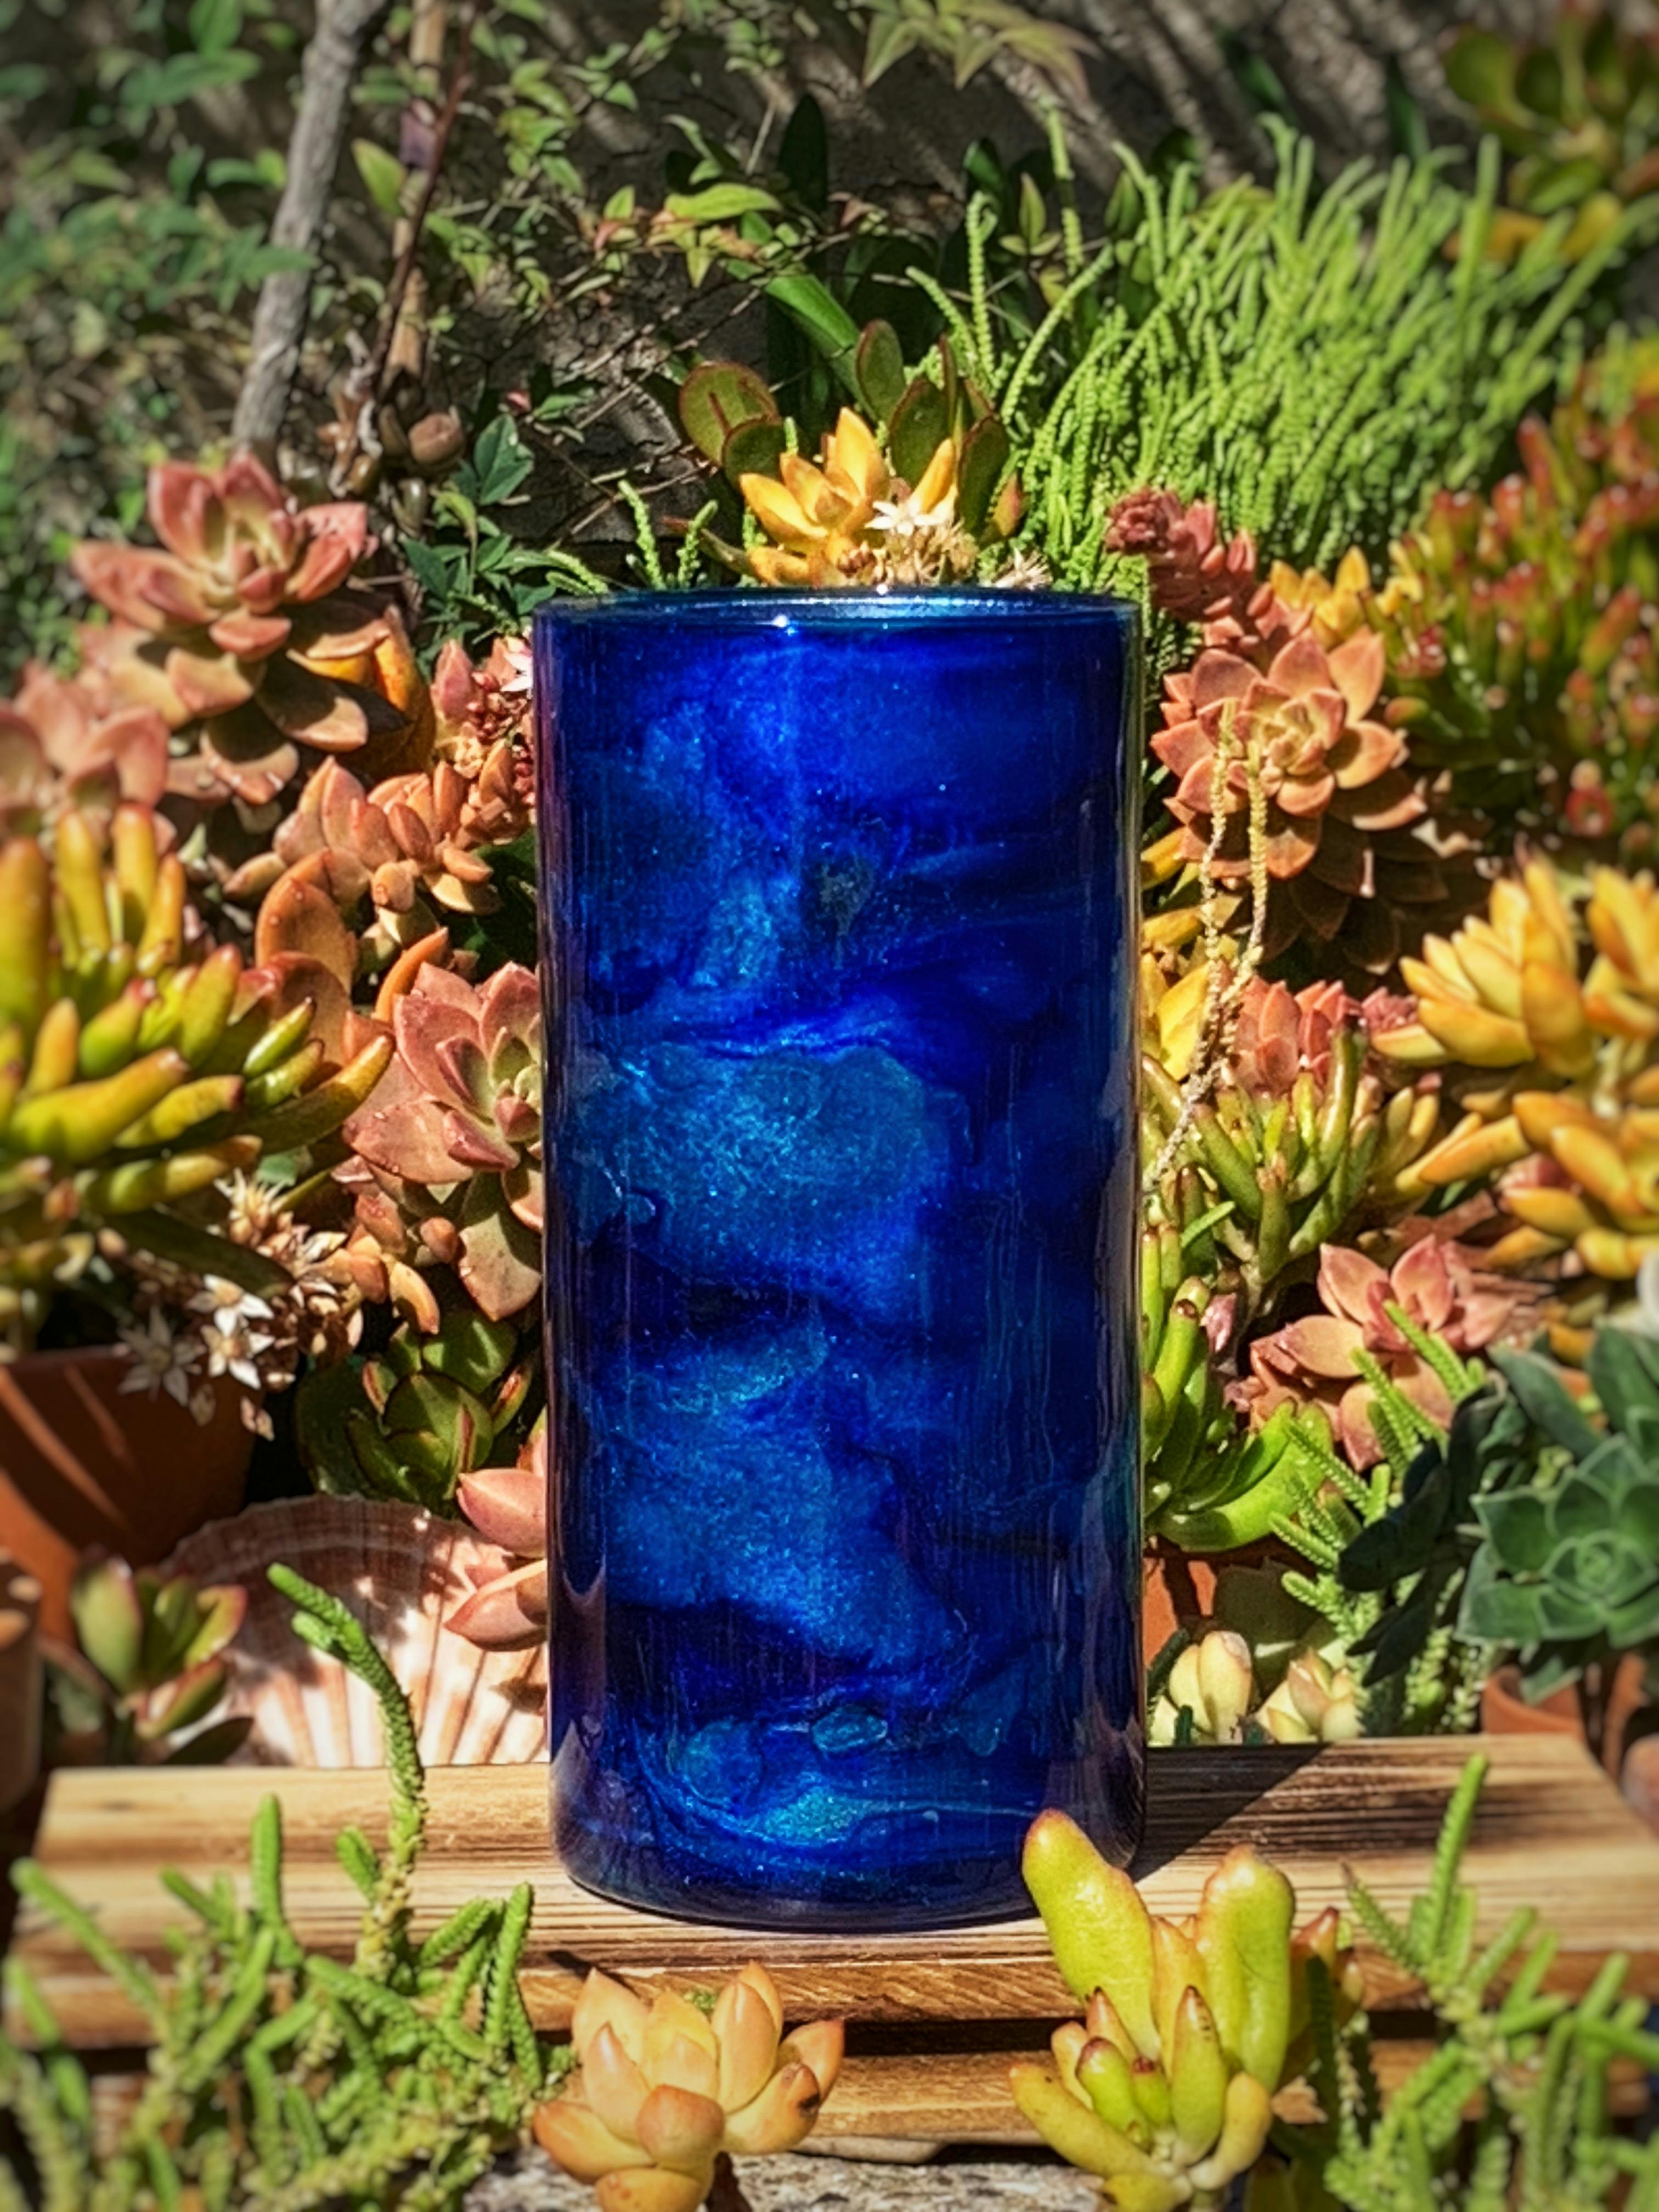 Glass vase finished with resin in shades of blue